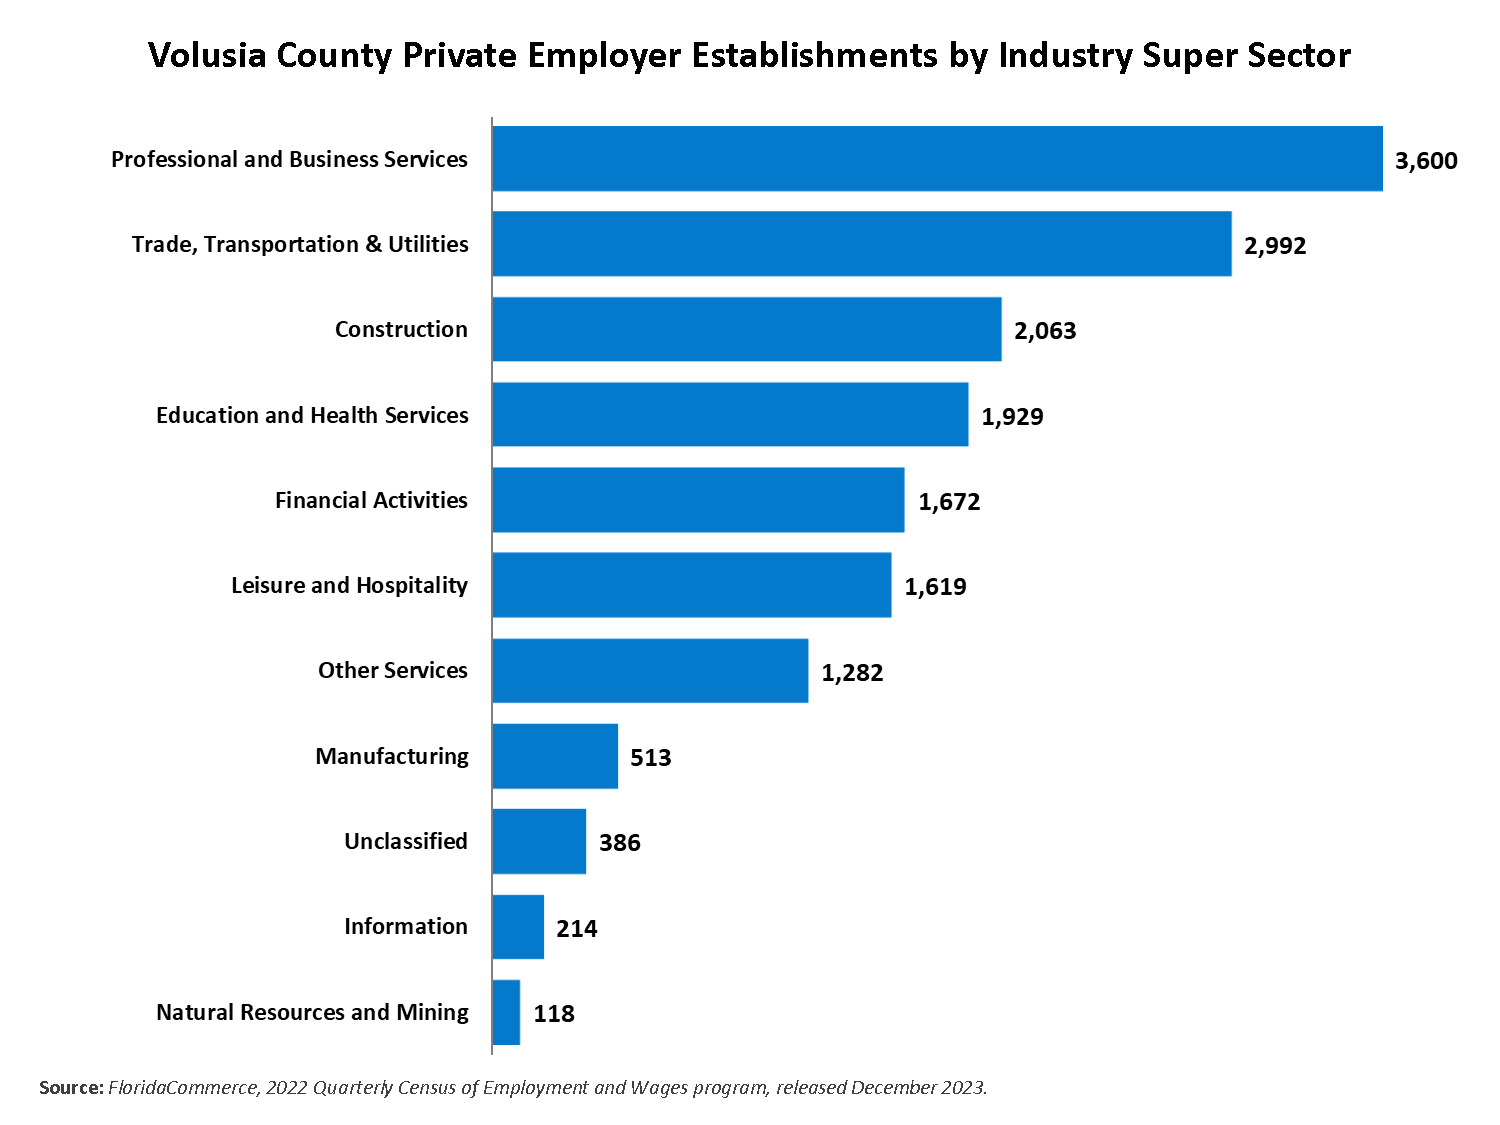 The chart shows the 2021 Volusia County Private employer establishments by Super Sector. The sector with the largest number of establishments was Professional and Business Services at 3,523. Trade, Transportation, and Utilities had 2,992. Construction 2,031. Education and Health Services 1,902. Financial Activities 1,640. Leisure and Hospitality 1,600. Other Services 1,282. Manufacturing 514. Unclassified 275. Information had 208. Natural Resources and Mining had the lowest number of establishments at 120.